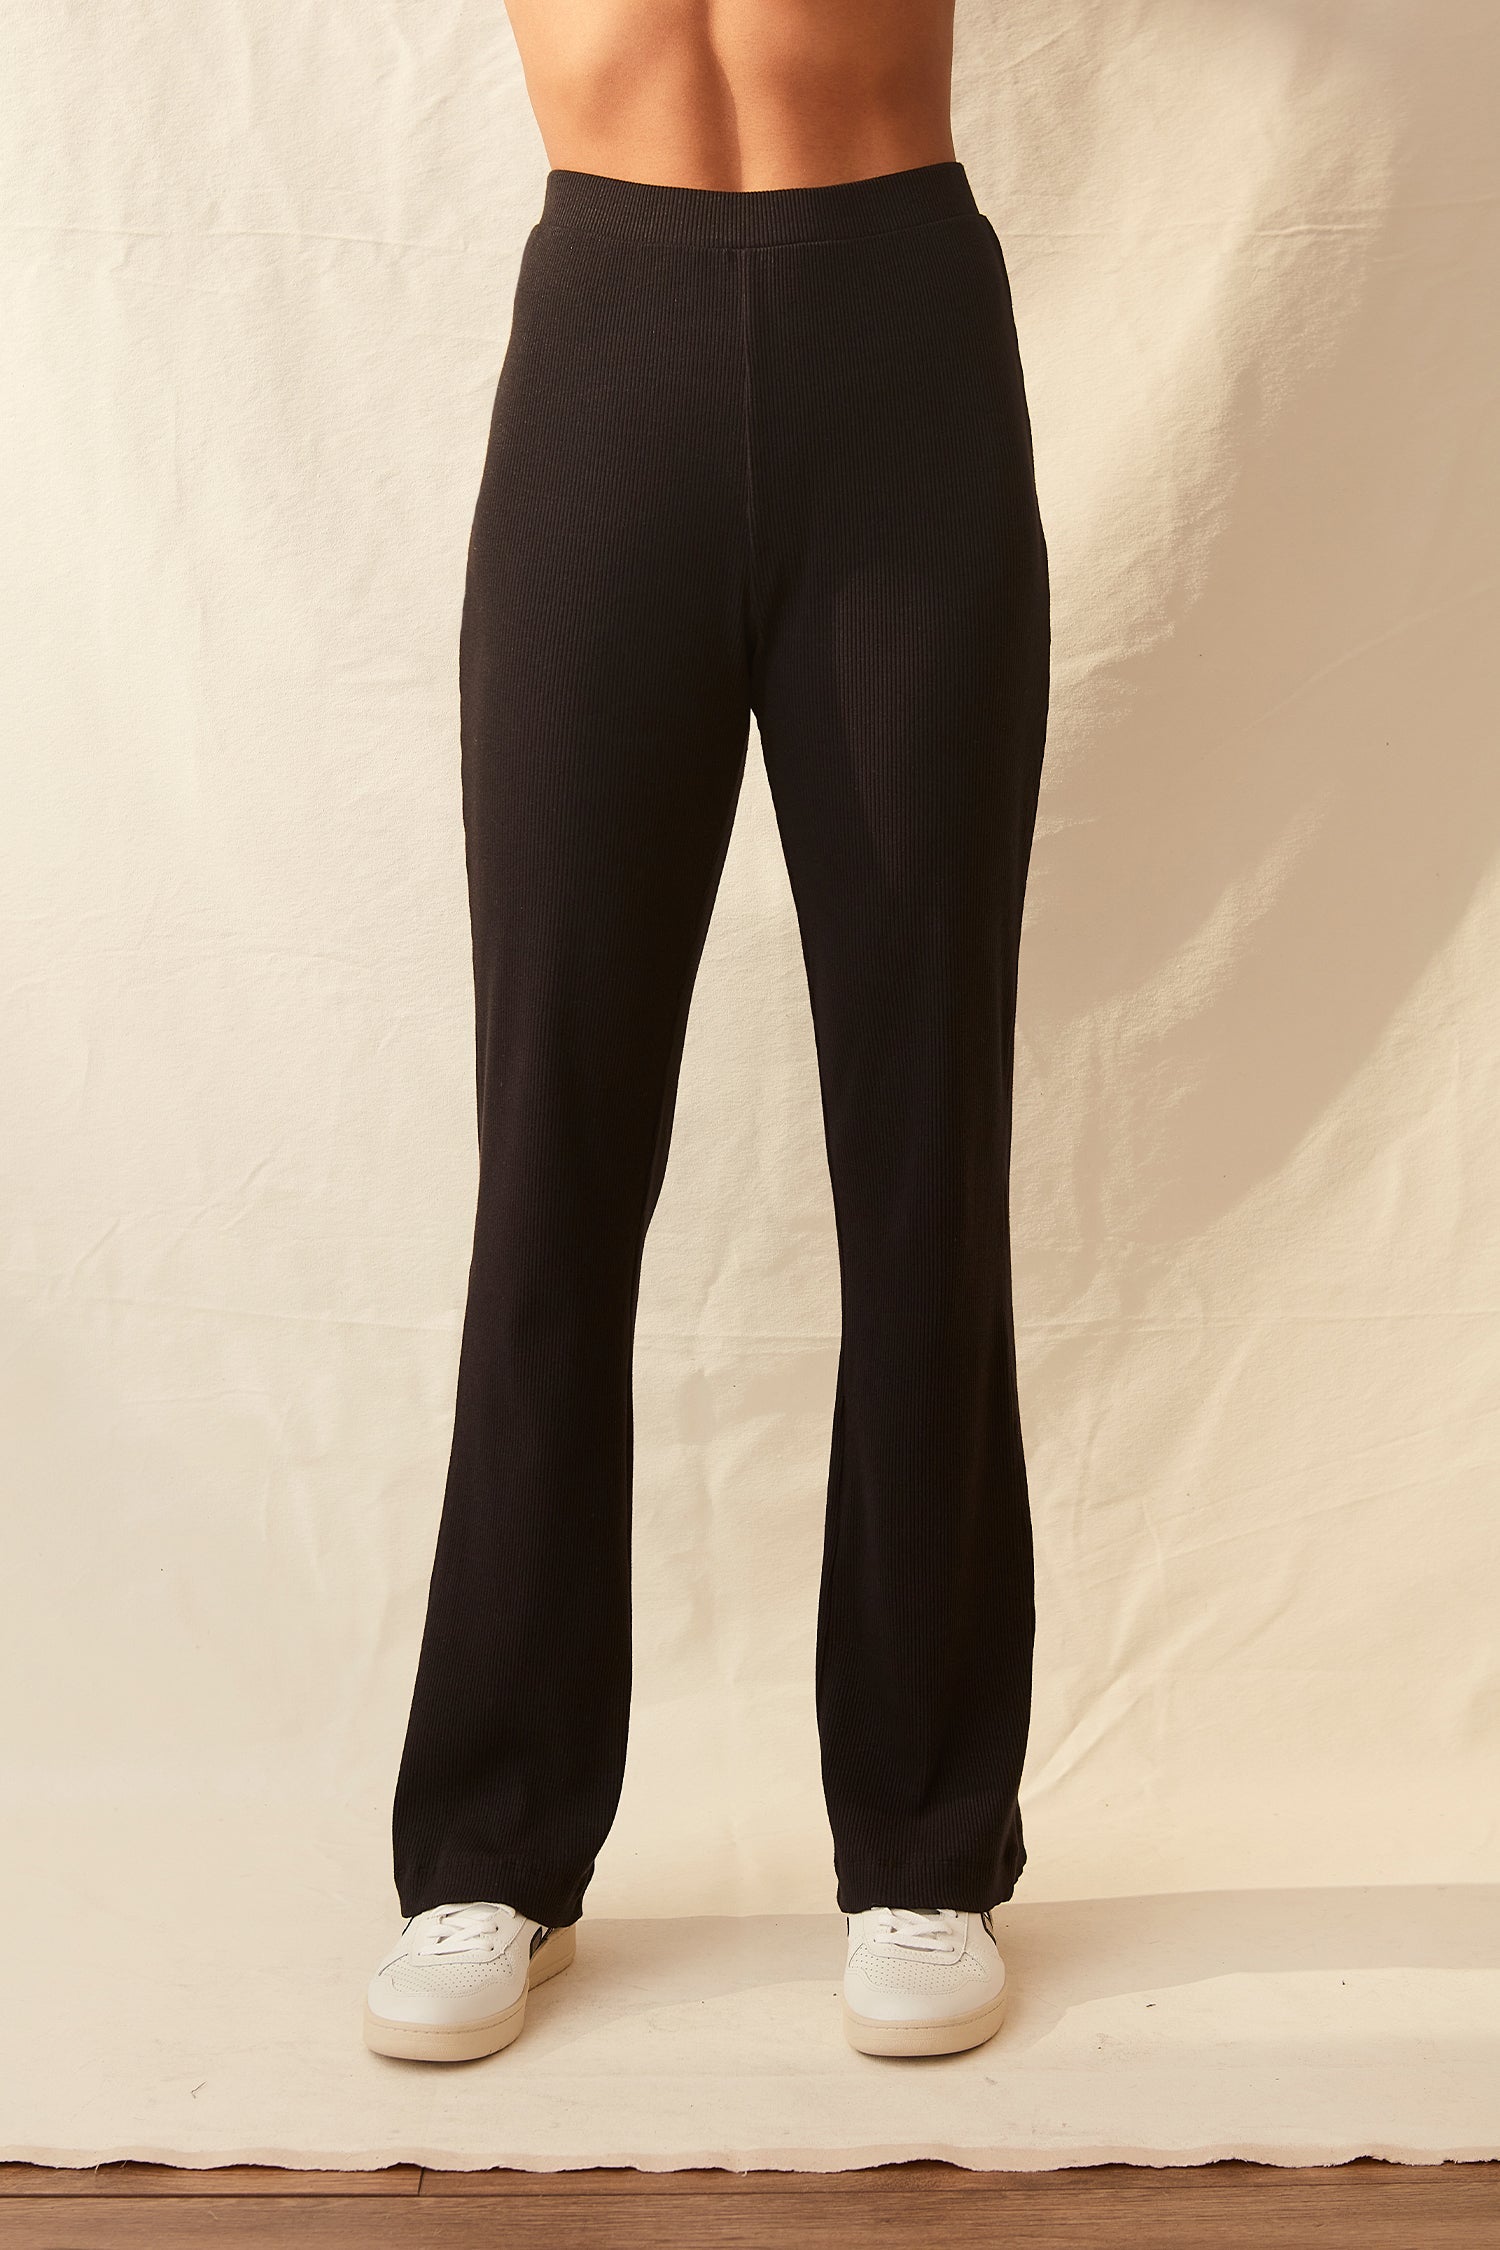 black fitted lounge pants for travel